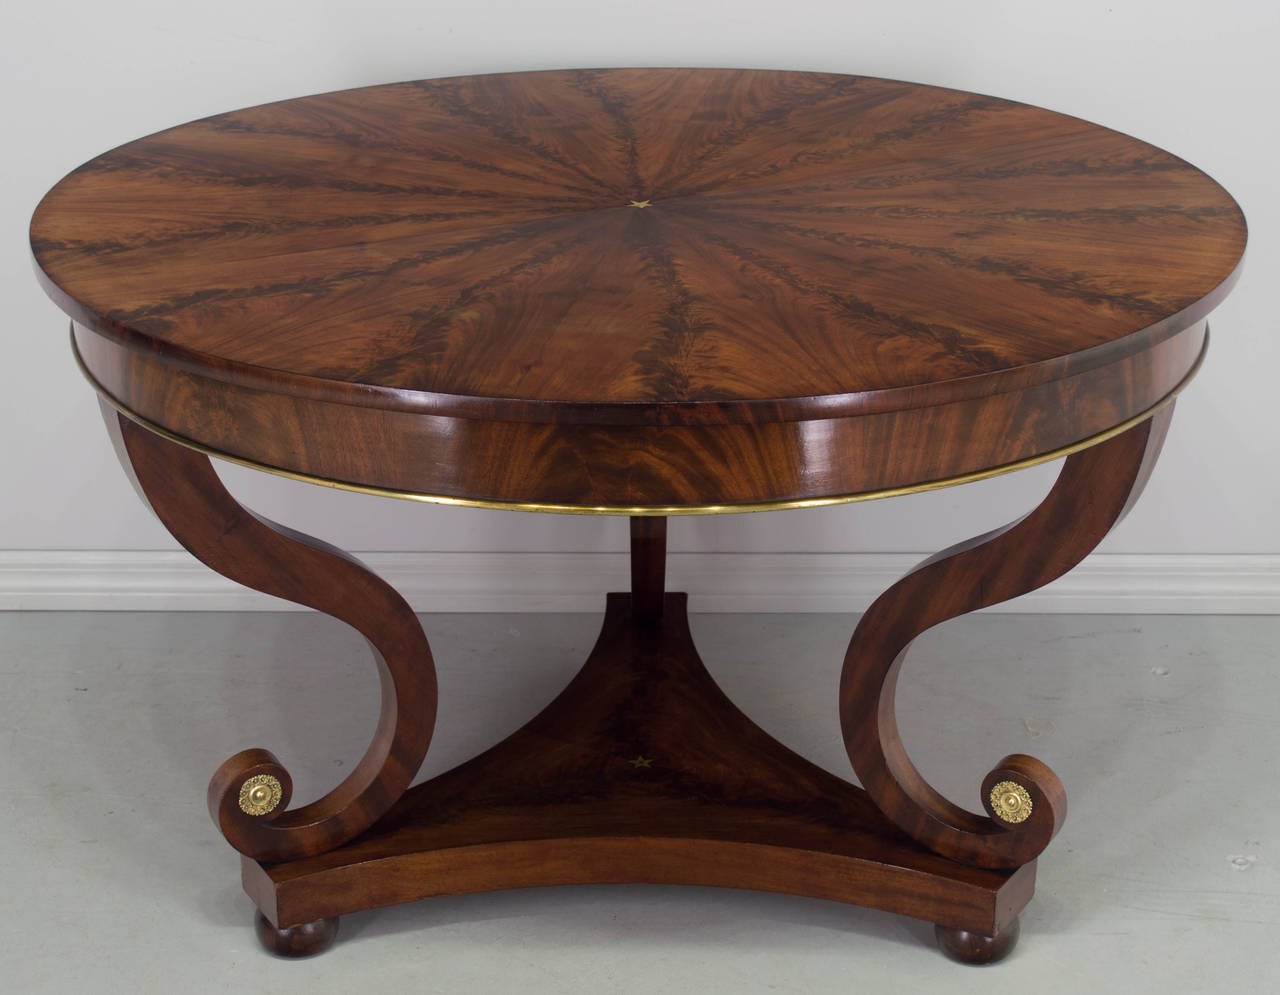 Exceptional early 19th century French gueridon or center table made of flamed mahogany veneer with bookmatched top. Elegant, graceful curved legs decorated with brass medallions. Curved triangular base is also bookmatched, with bun feet and small